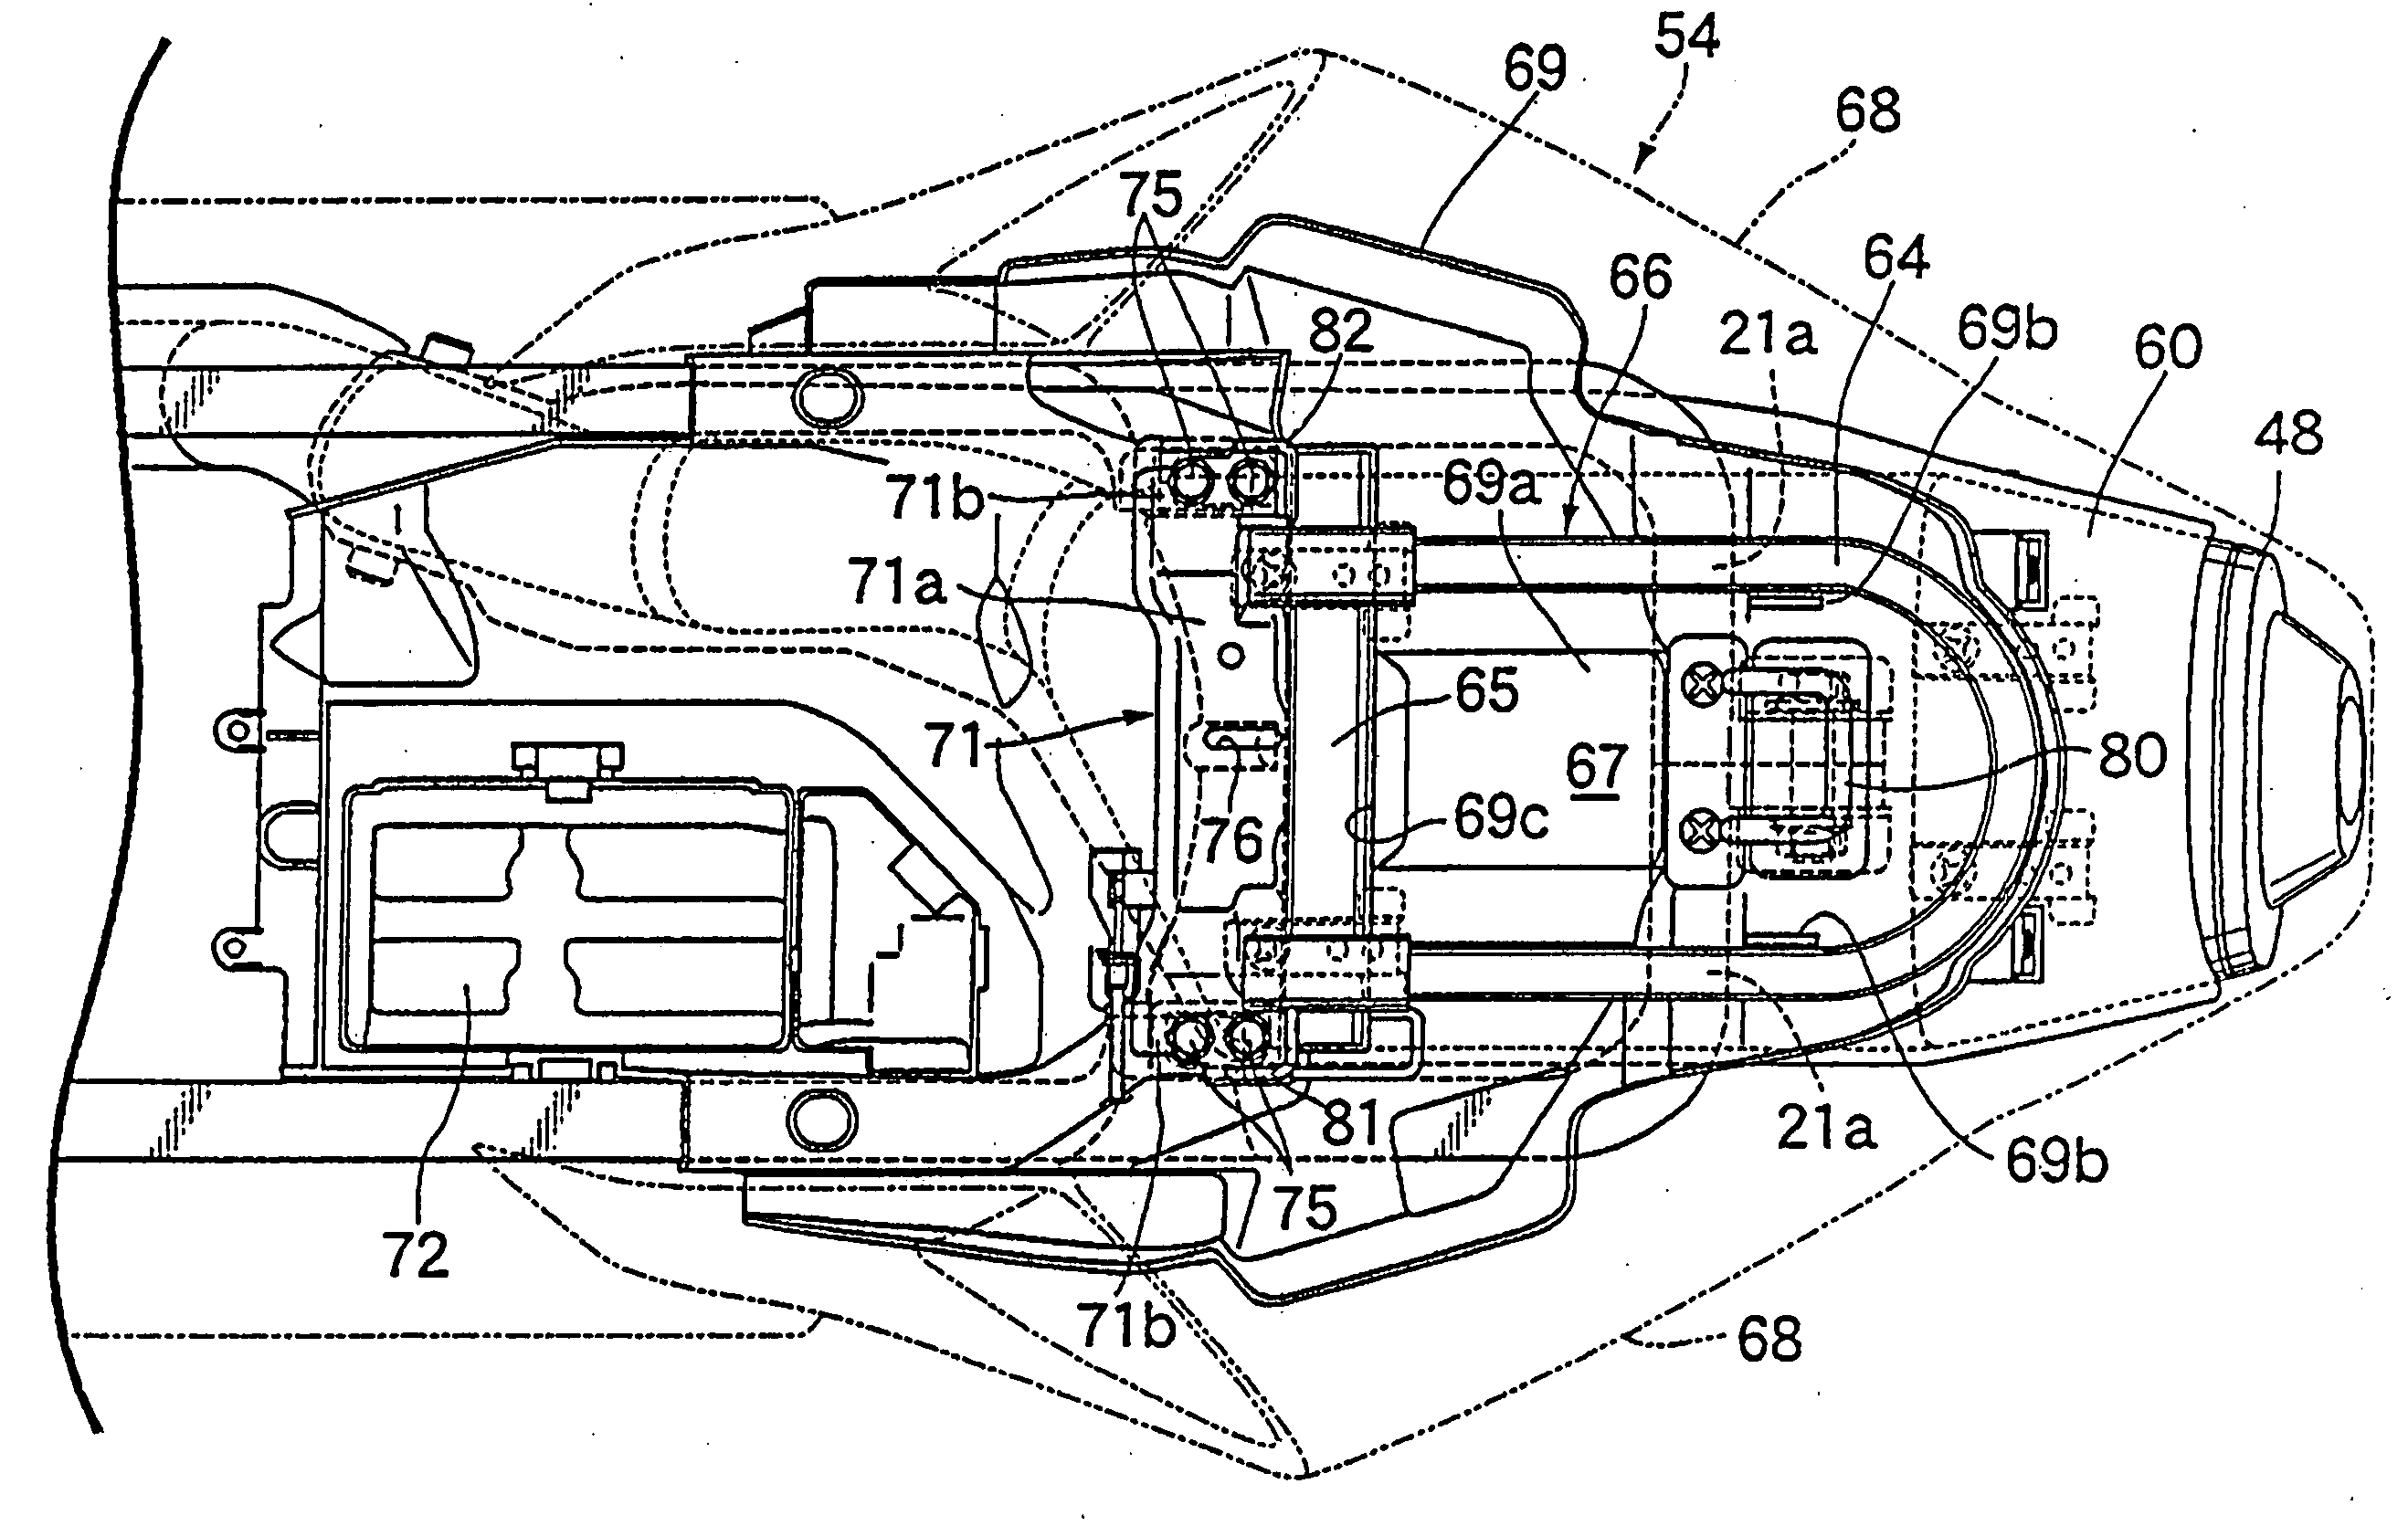 U-shaped locking anti-theft tool storage and support structure in vehicle